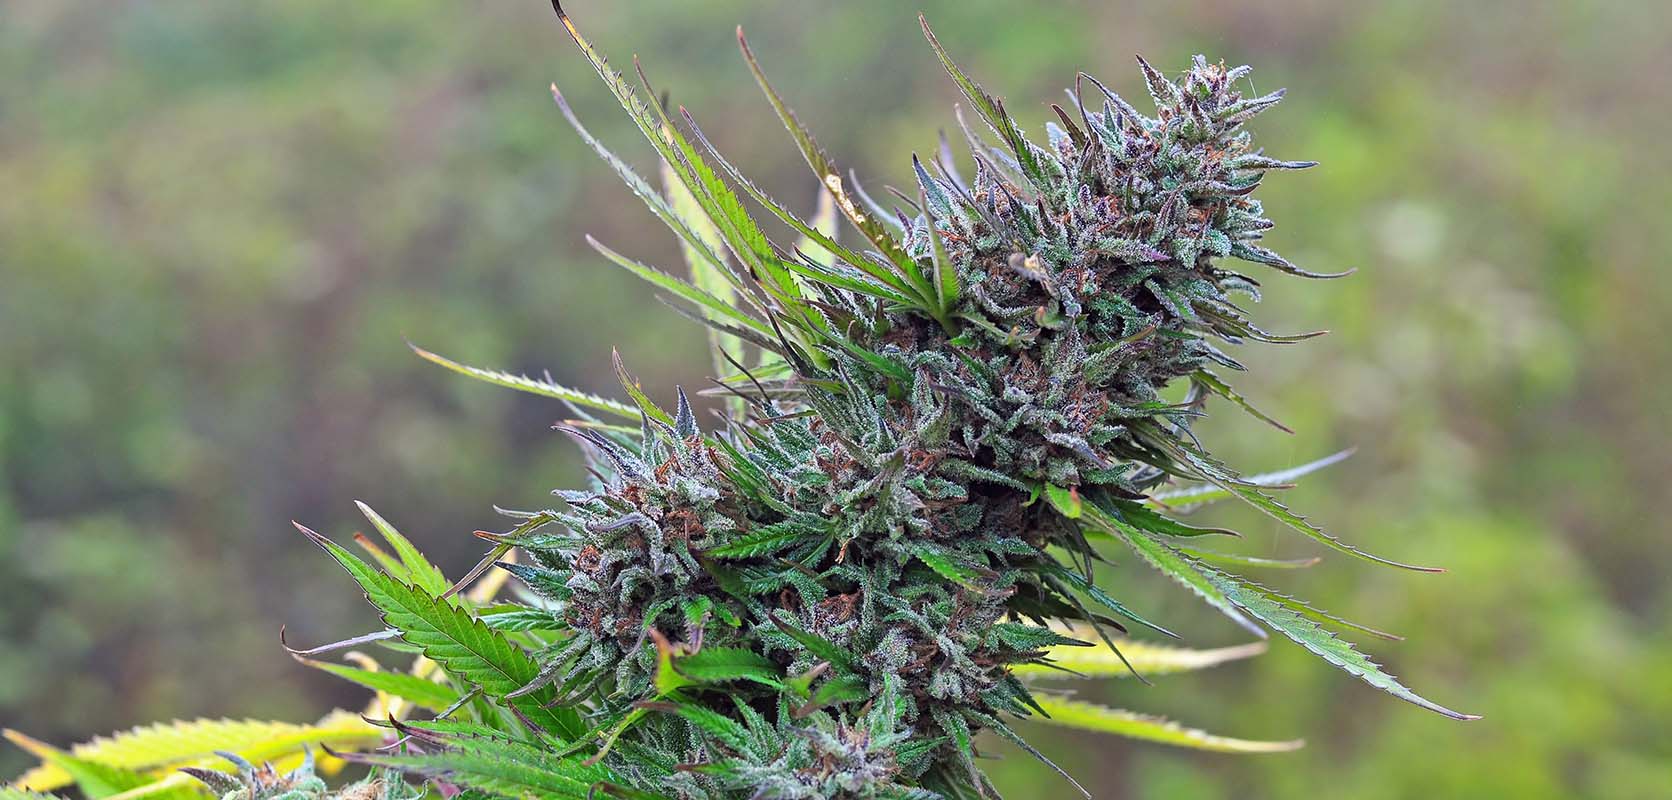 Pink Bubba cannabis plant. BC cannabis. mail order marijuana online dispensary in Canada to buy weed online.